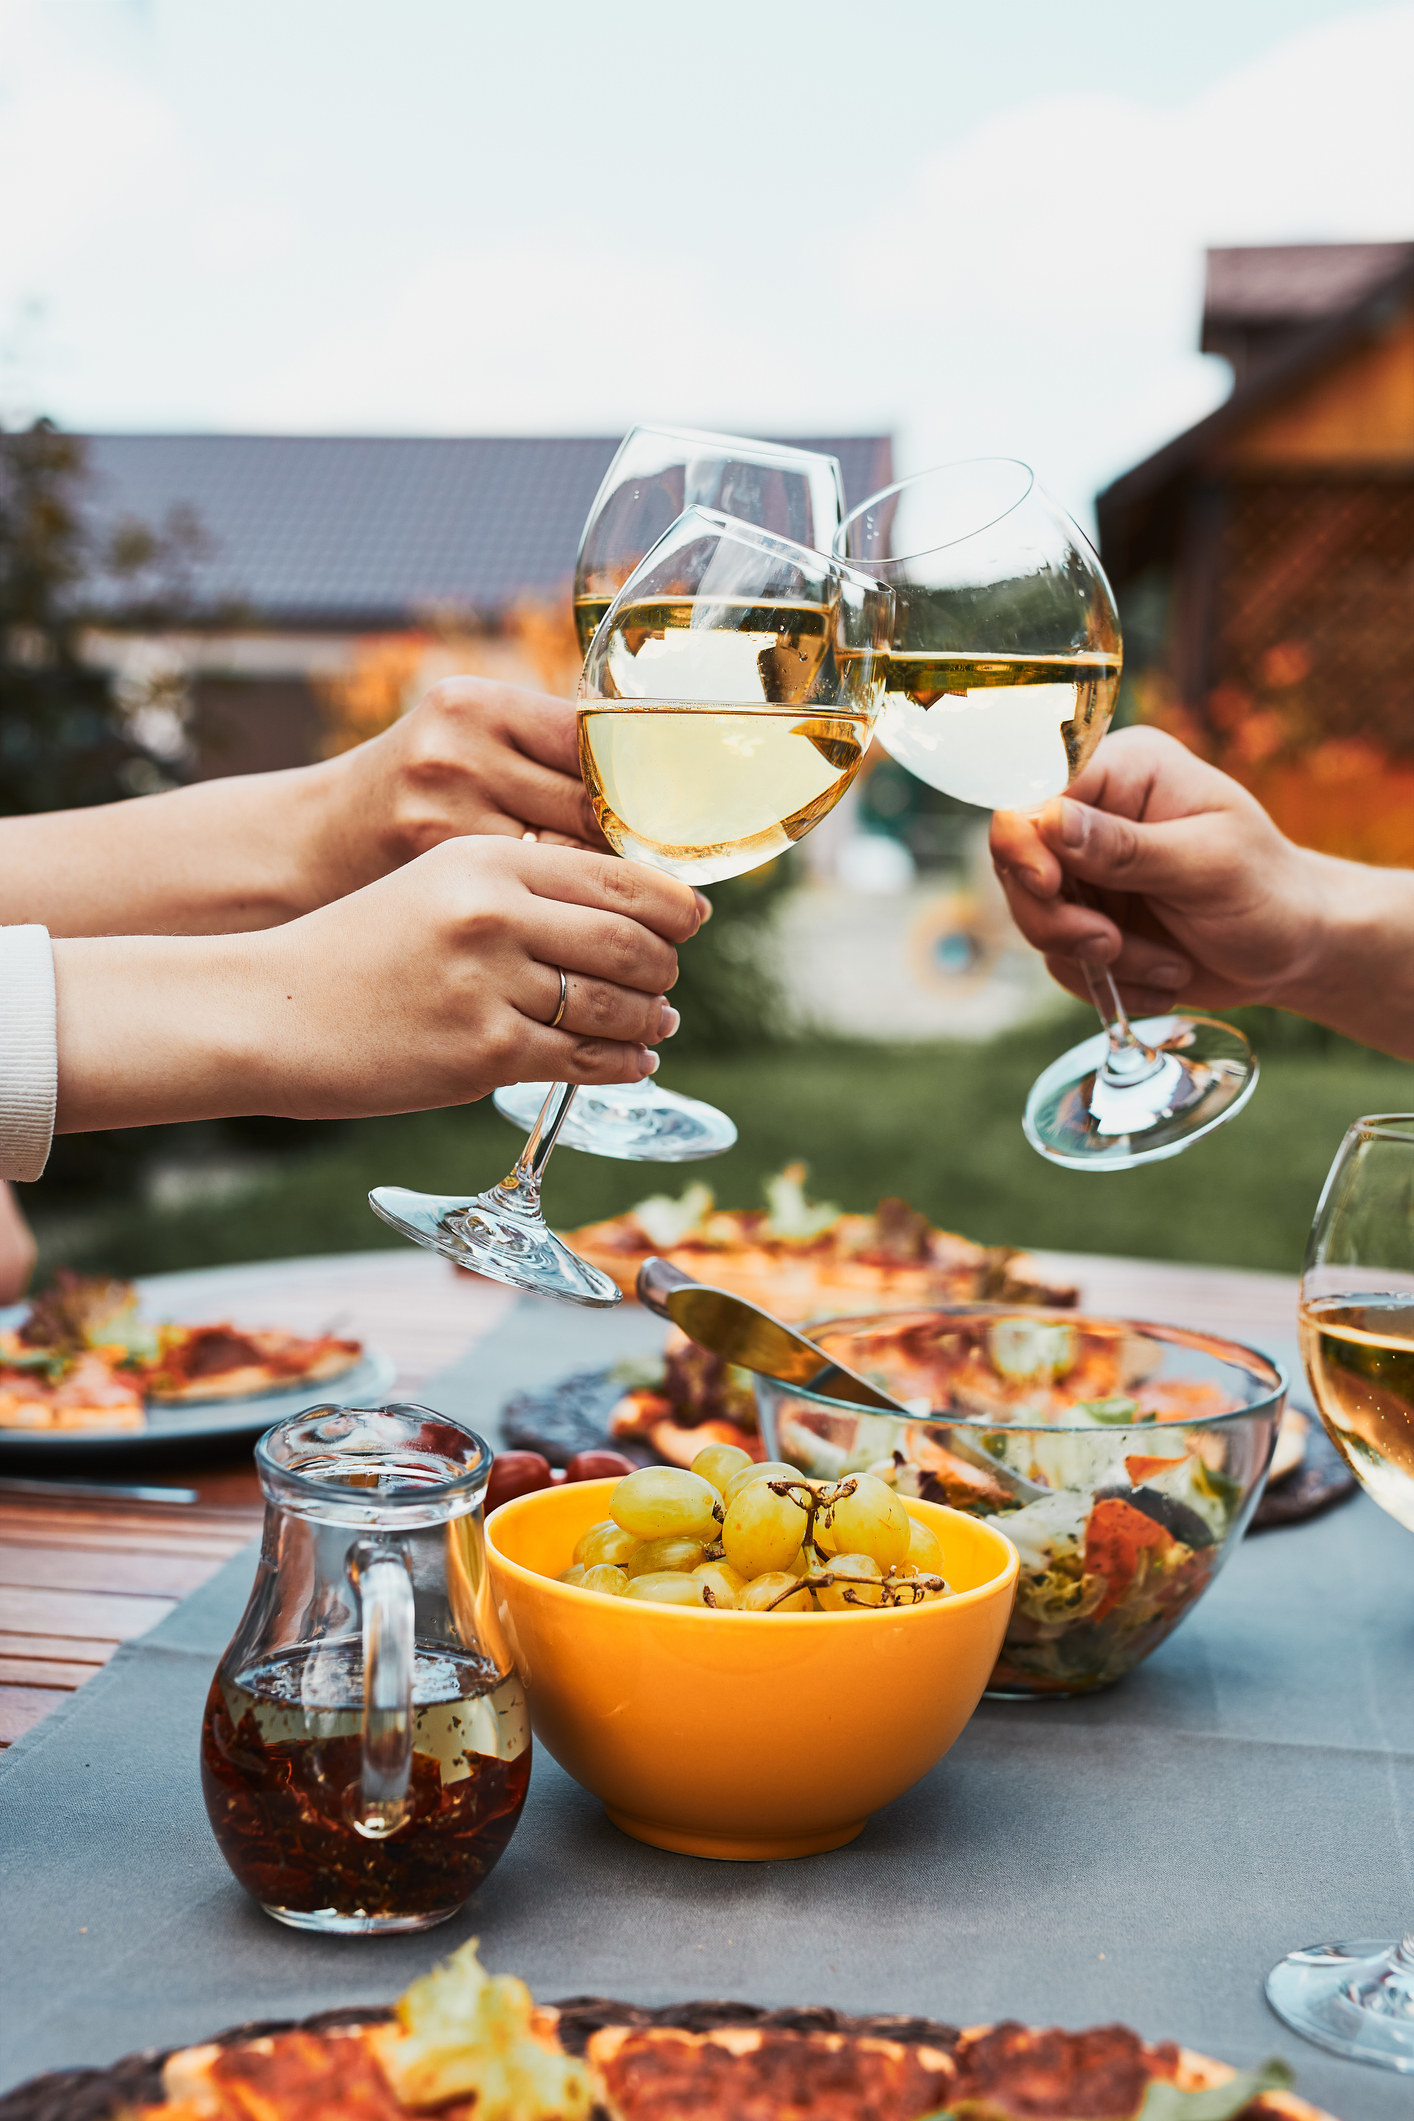 Friends toasting with wine glasses at an outdoor dinner party